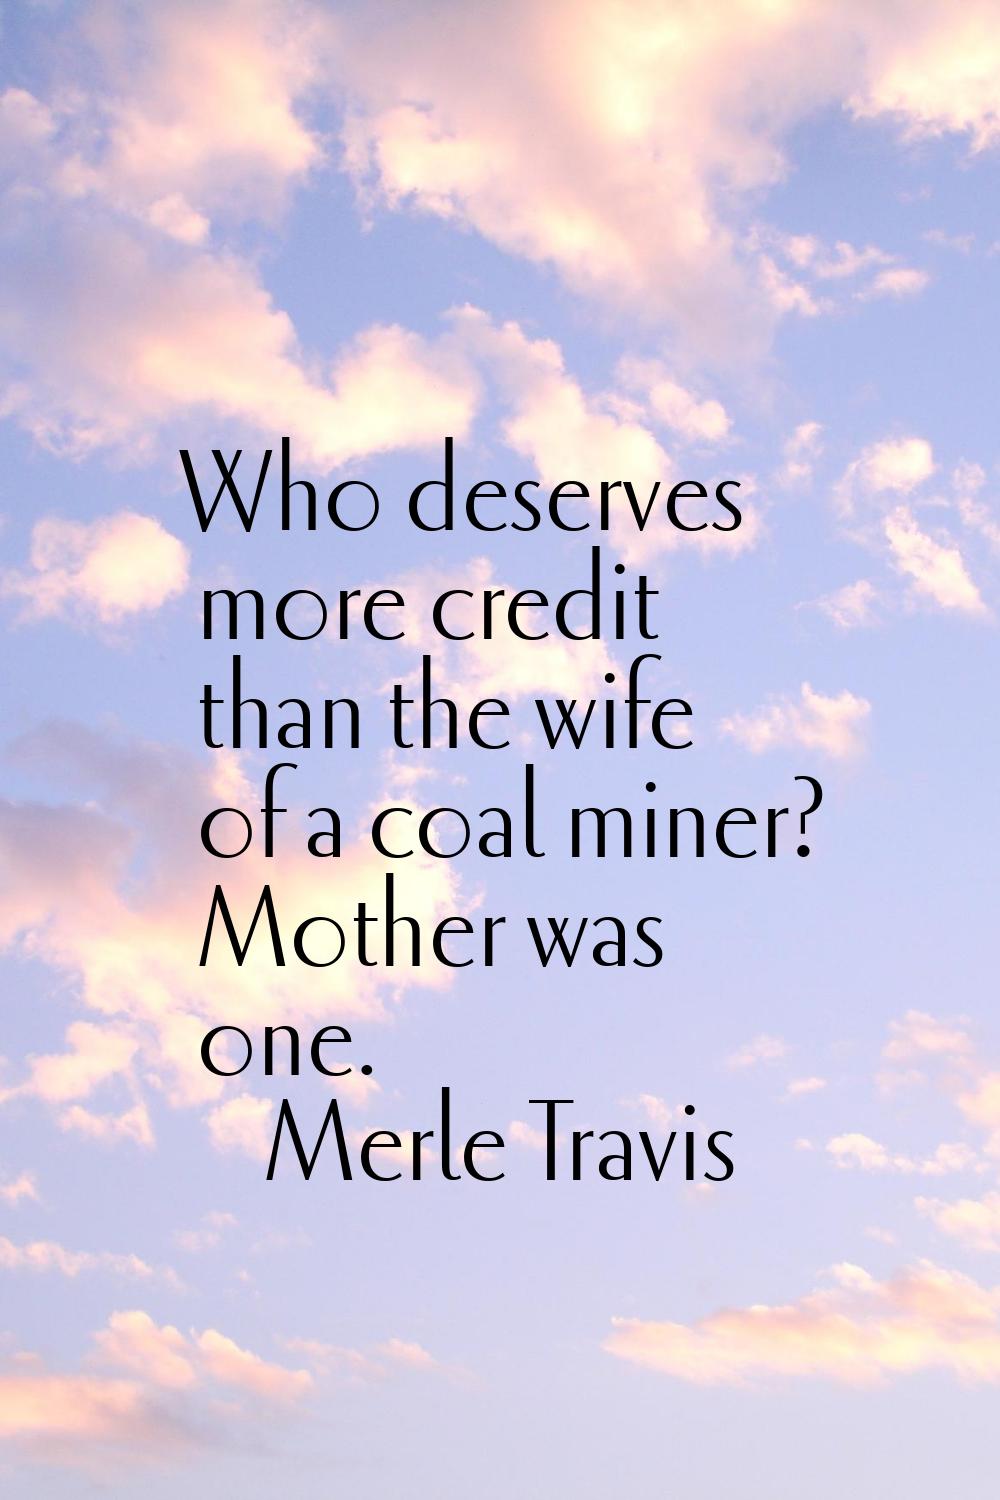 Who deserves more credit than the wife of a coal miner? Mother was one.